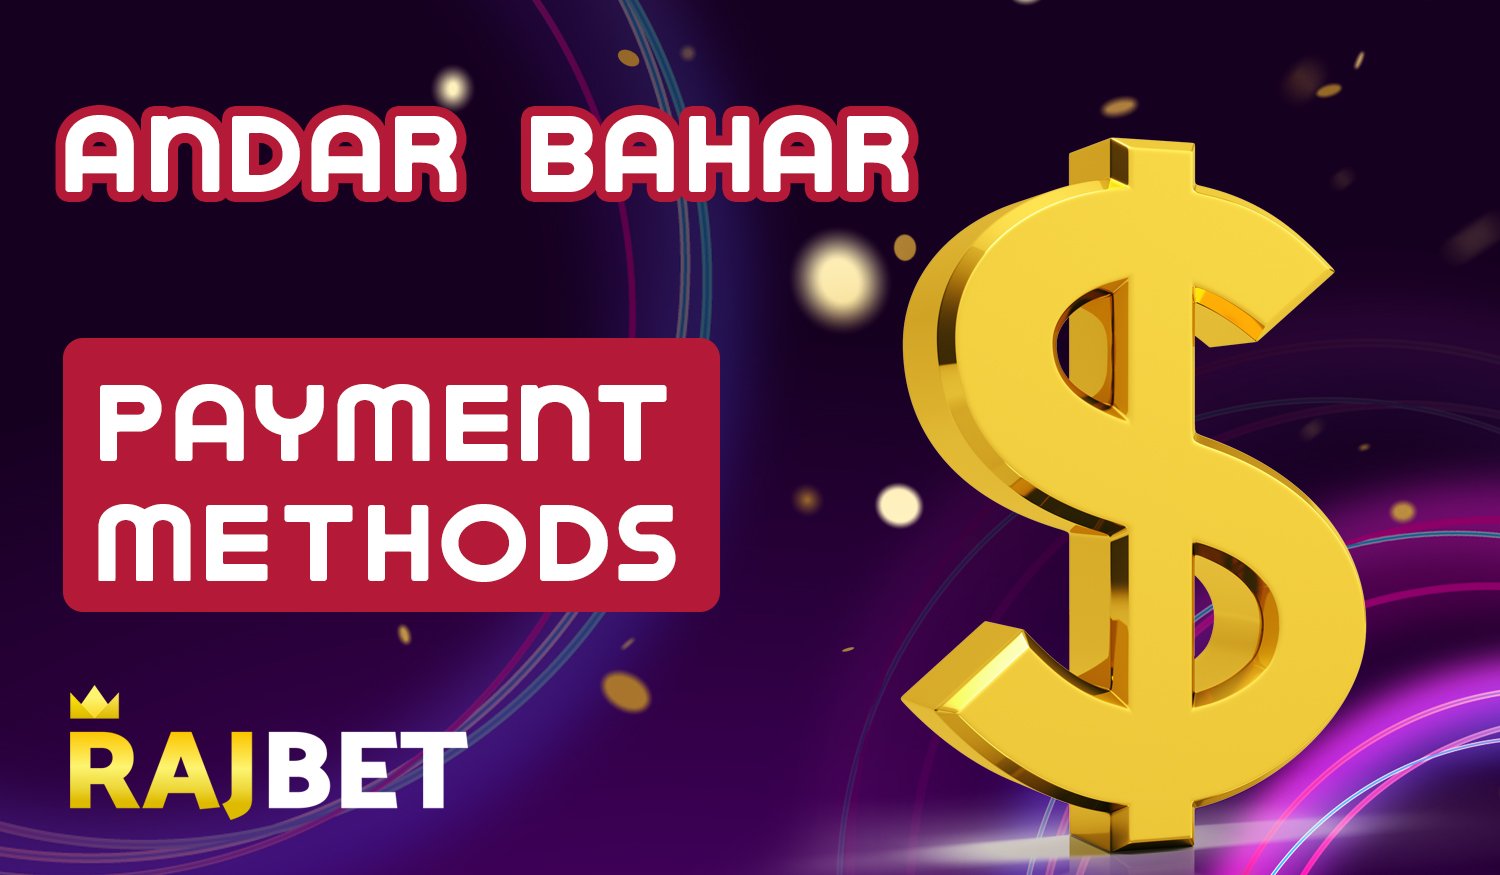 Methods available for making deposits and withdrawals at Rajbet